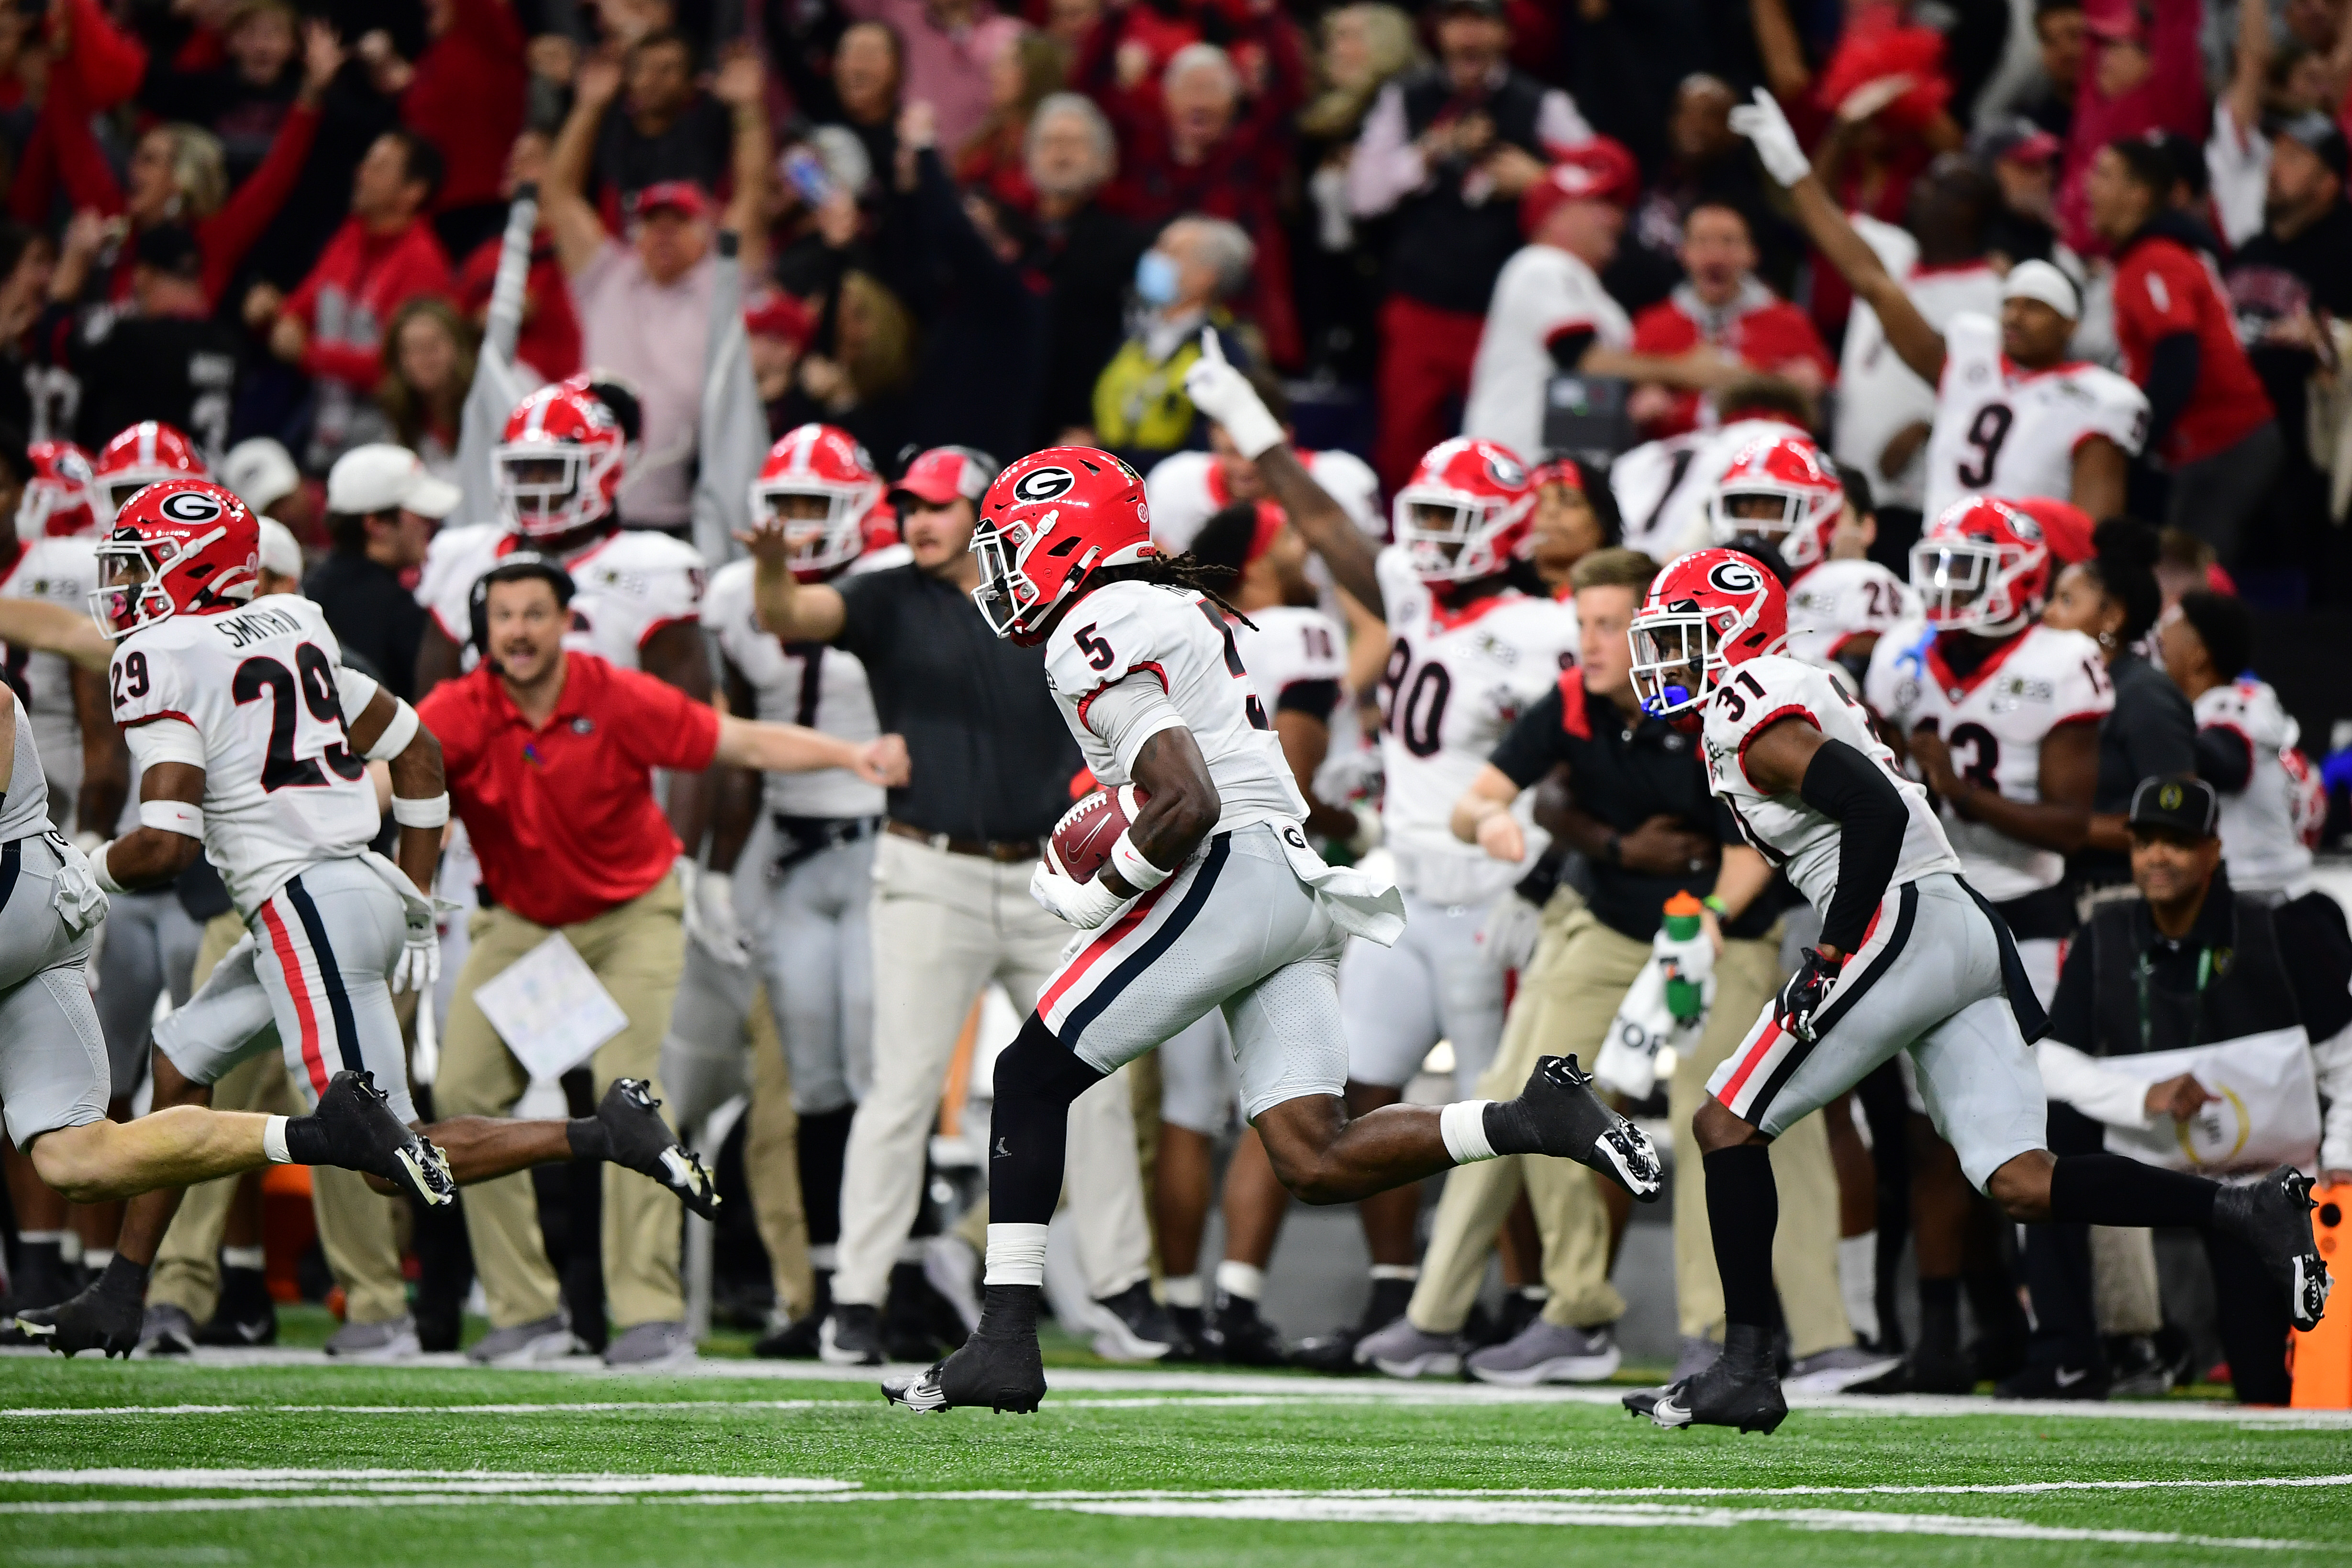 Georgia pulls away from Alabama in fourth quarter to win first